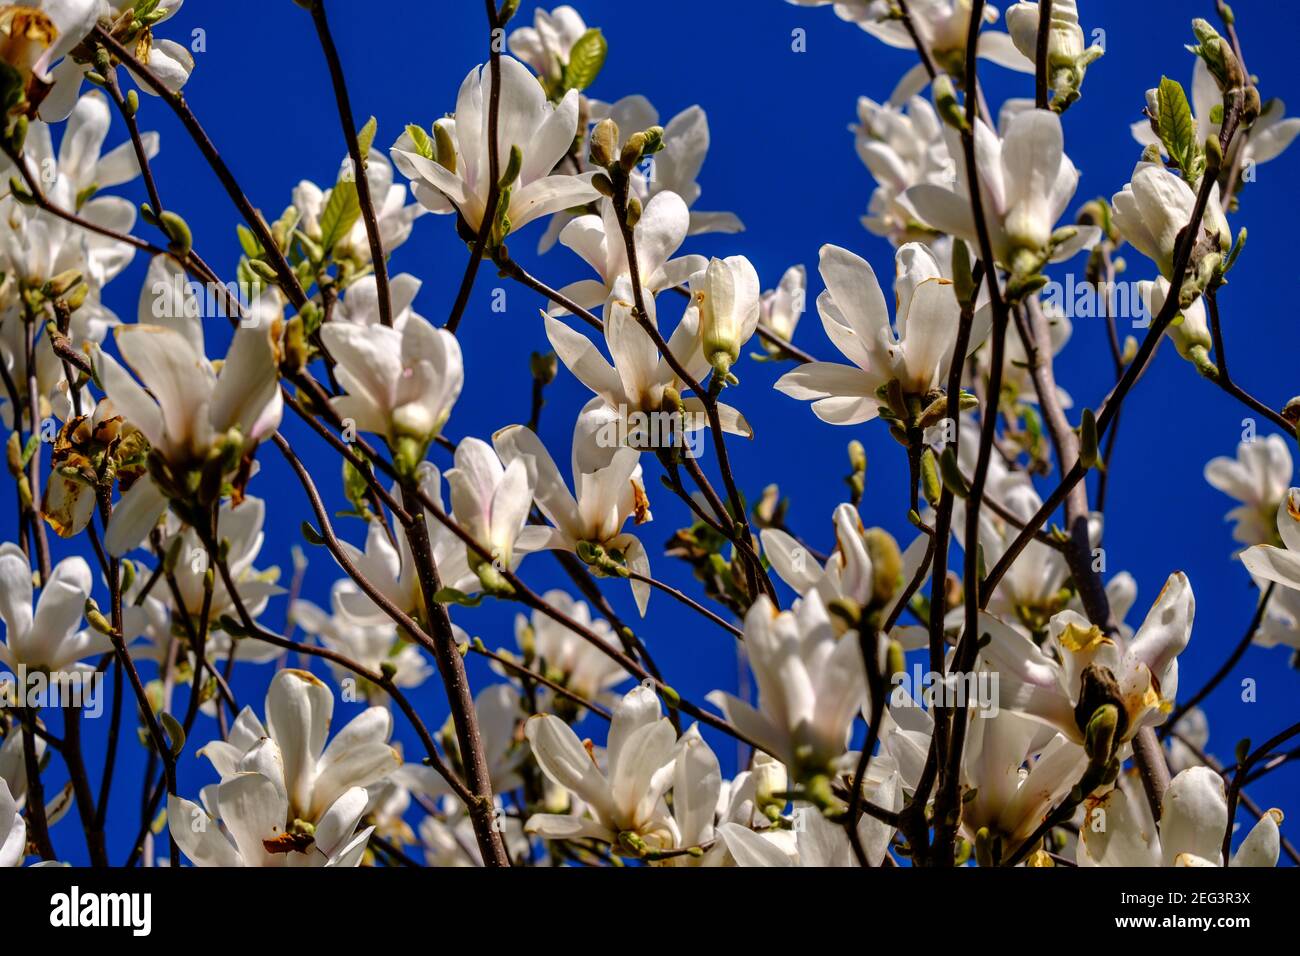 Magnolia tree with white blossoms against a blue sky. Stock Photo